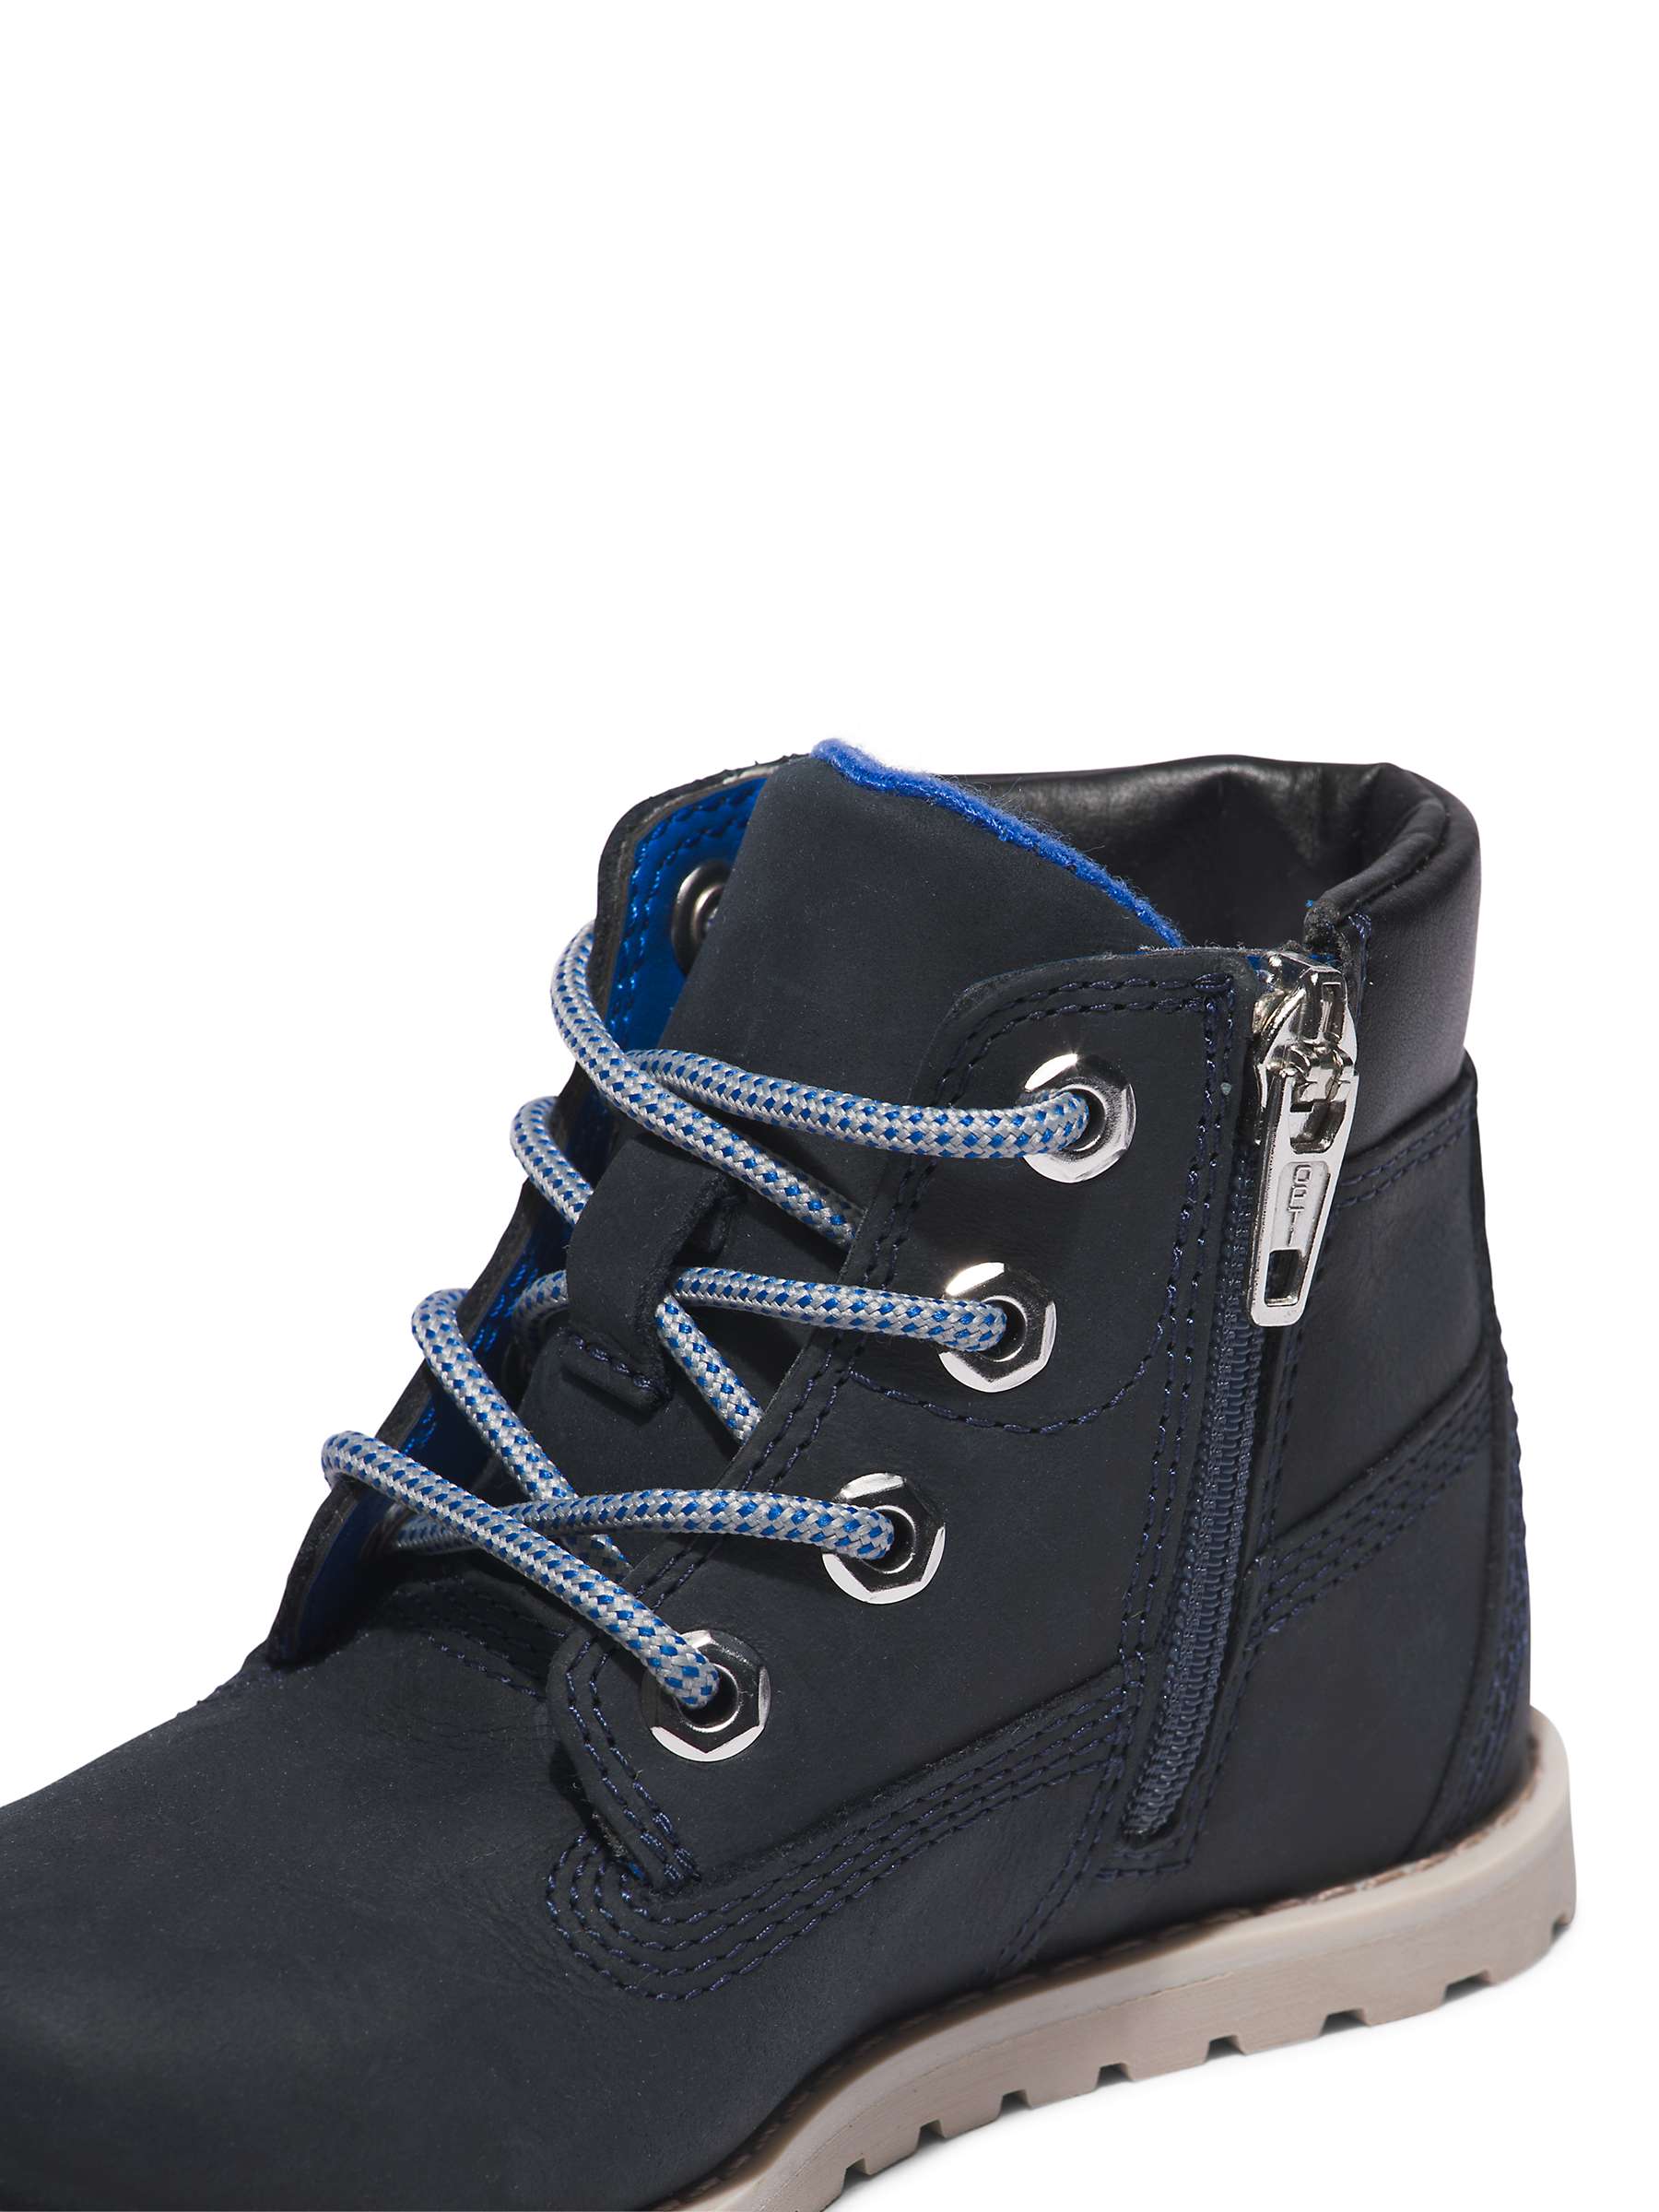 Buy Timberland Kids' Pokey Pine Ankle Boots Online at johnlewis.com